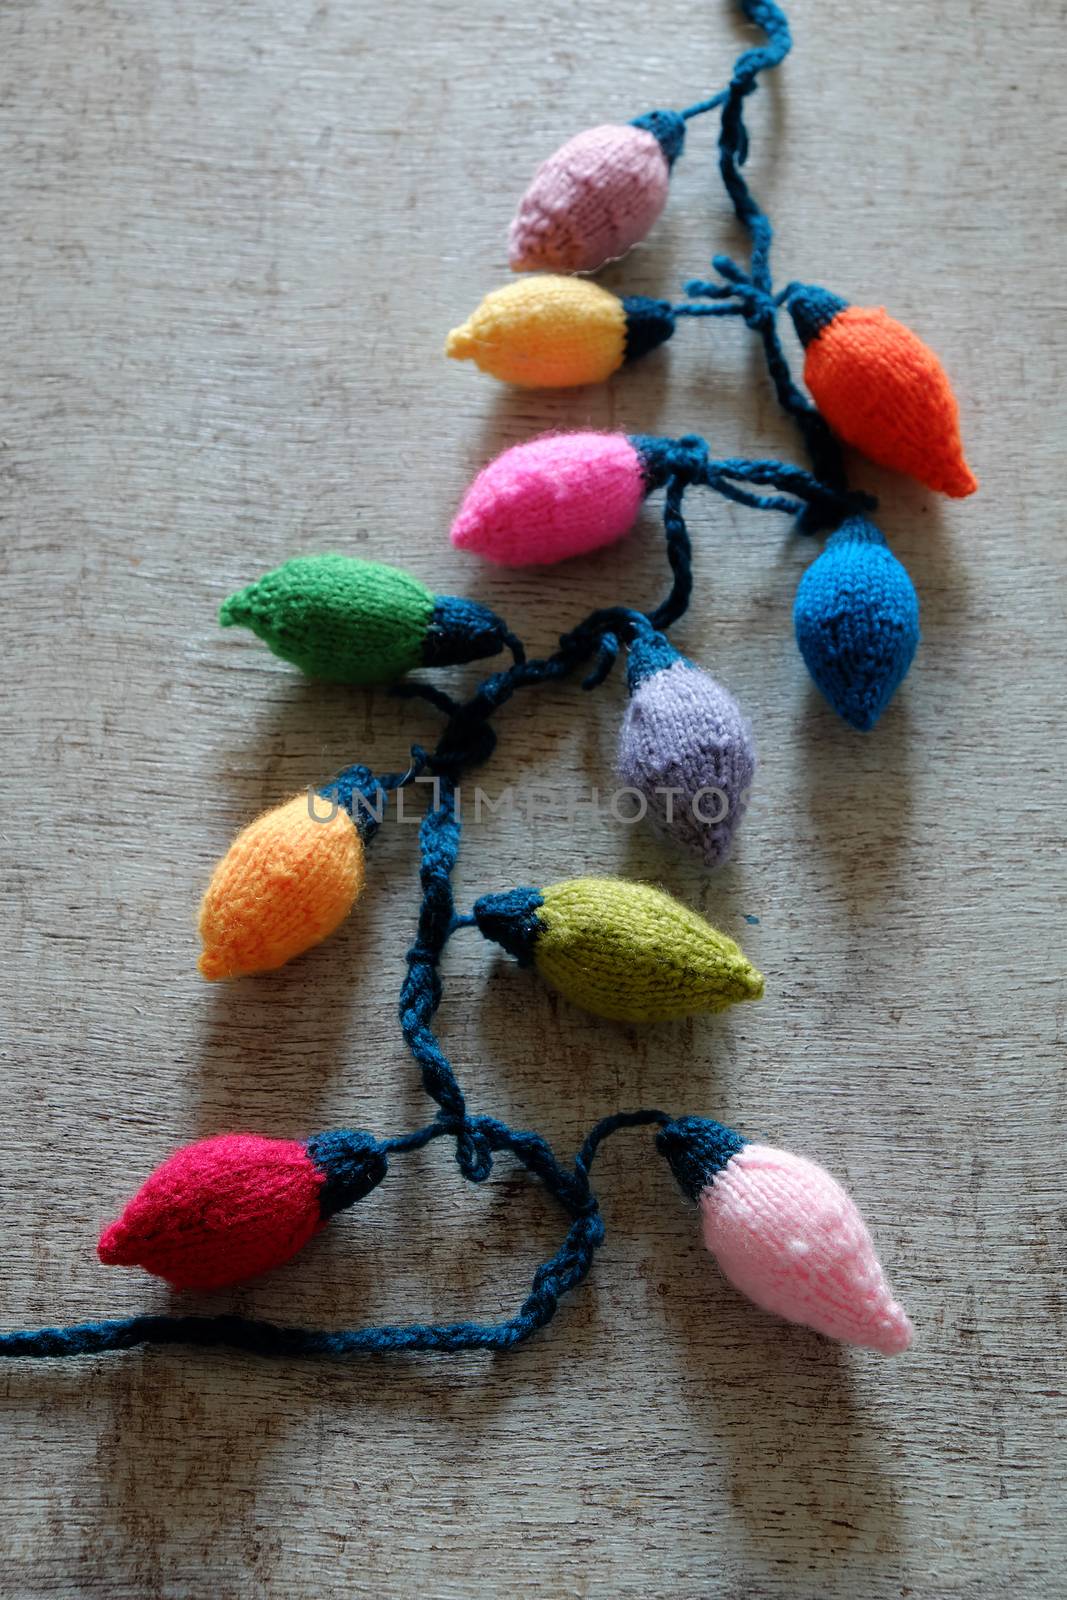 Group of colorful Xmas ornament for winter holiday, handmade product from yarn, knitted Christmas lights bulb on wood background